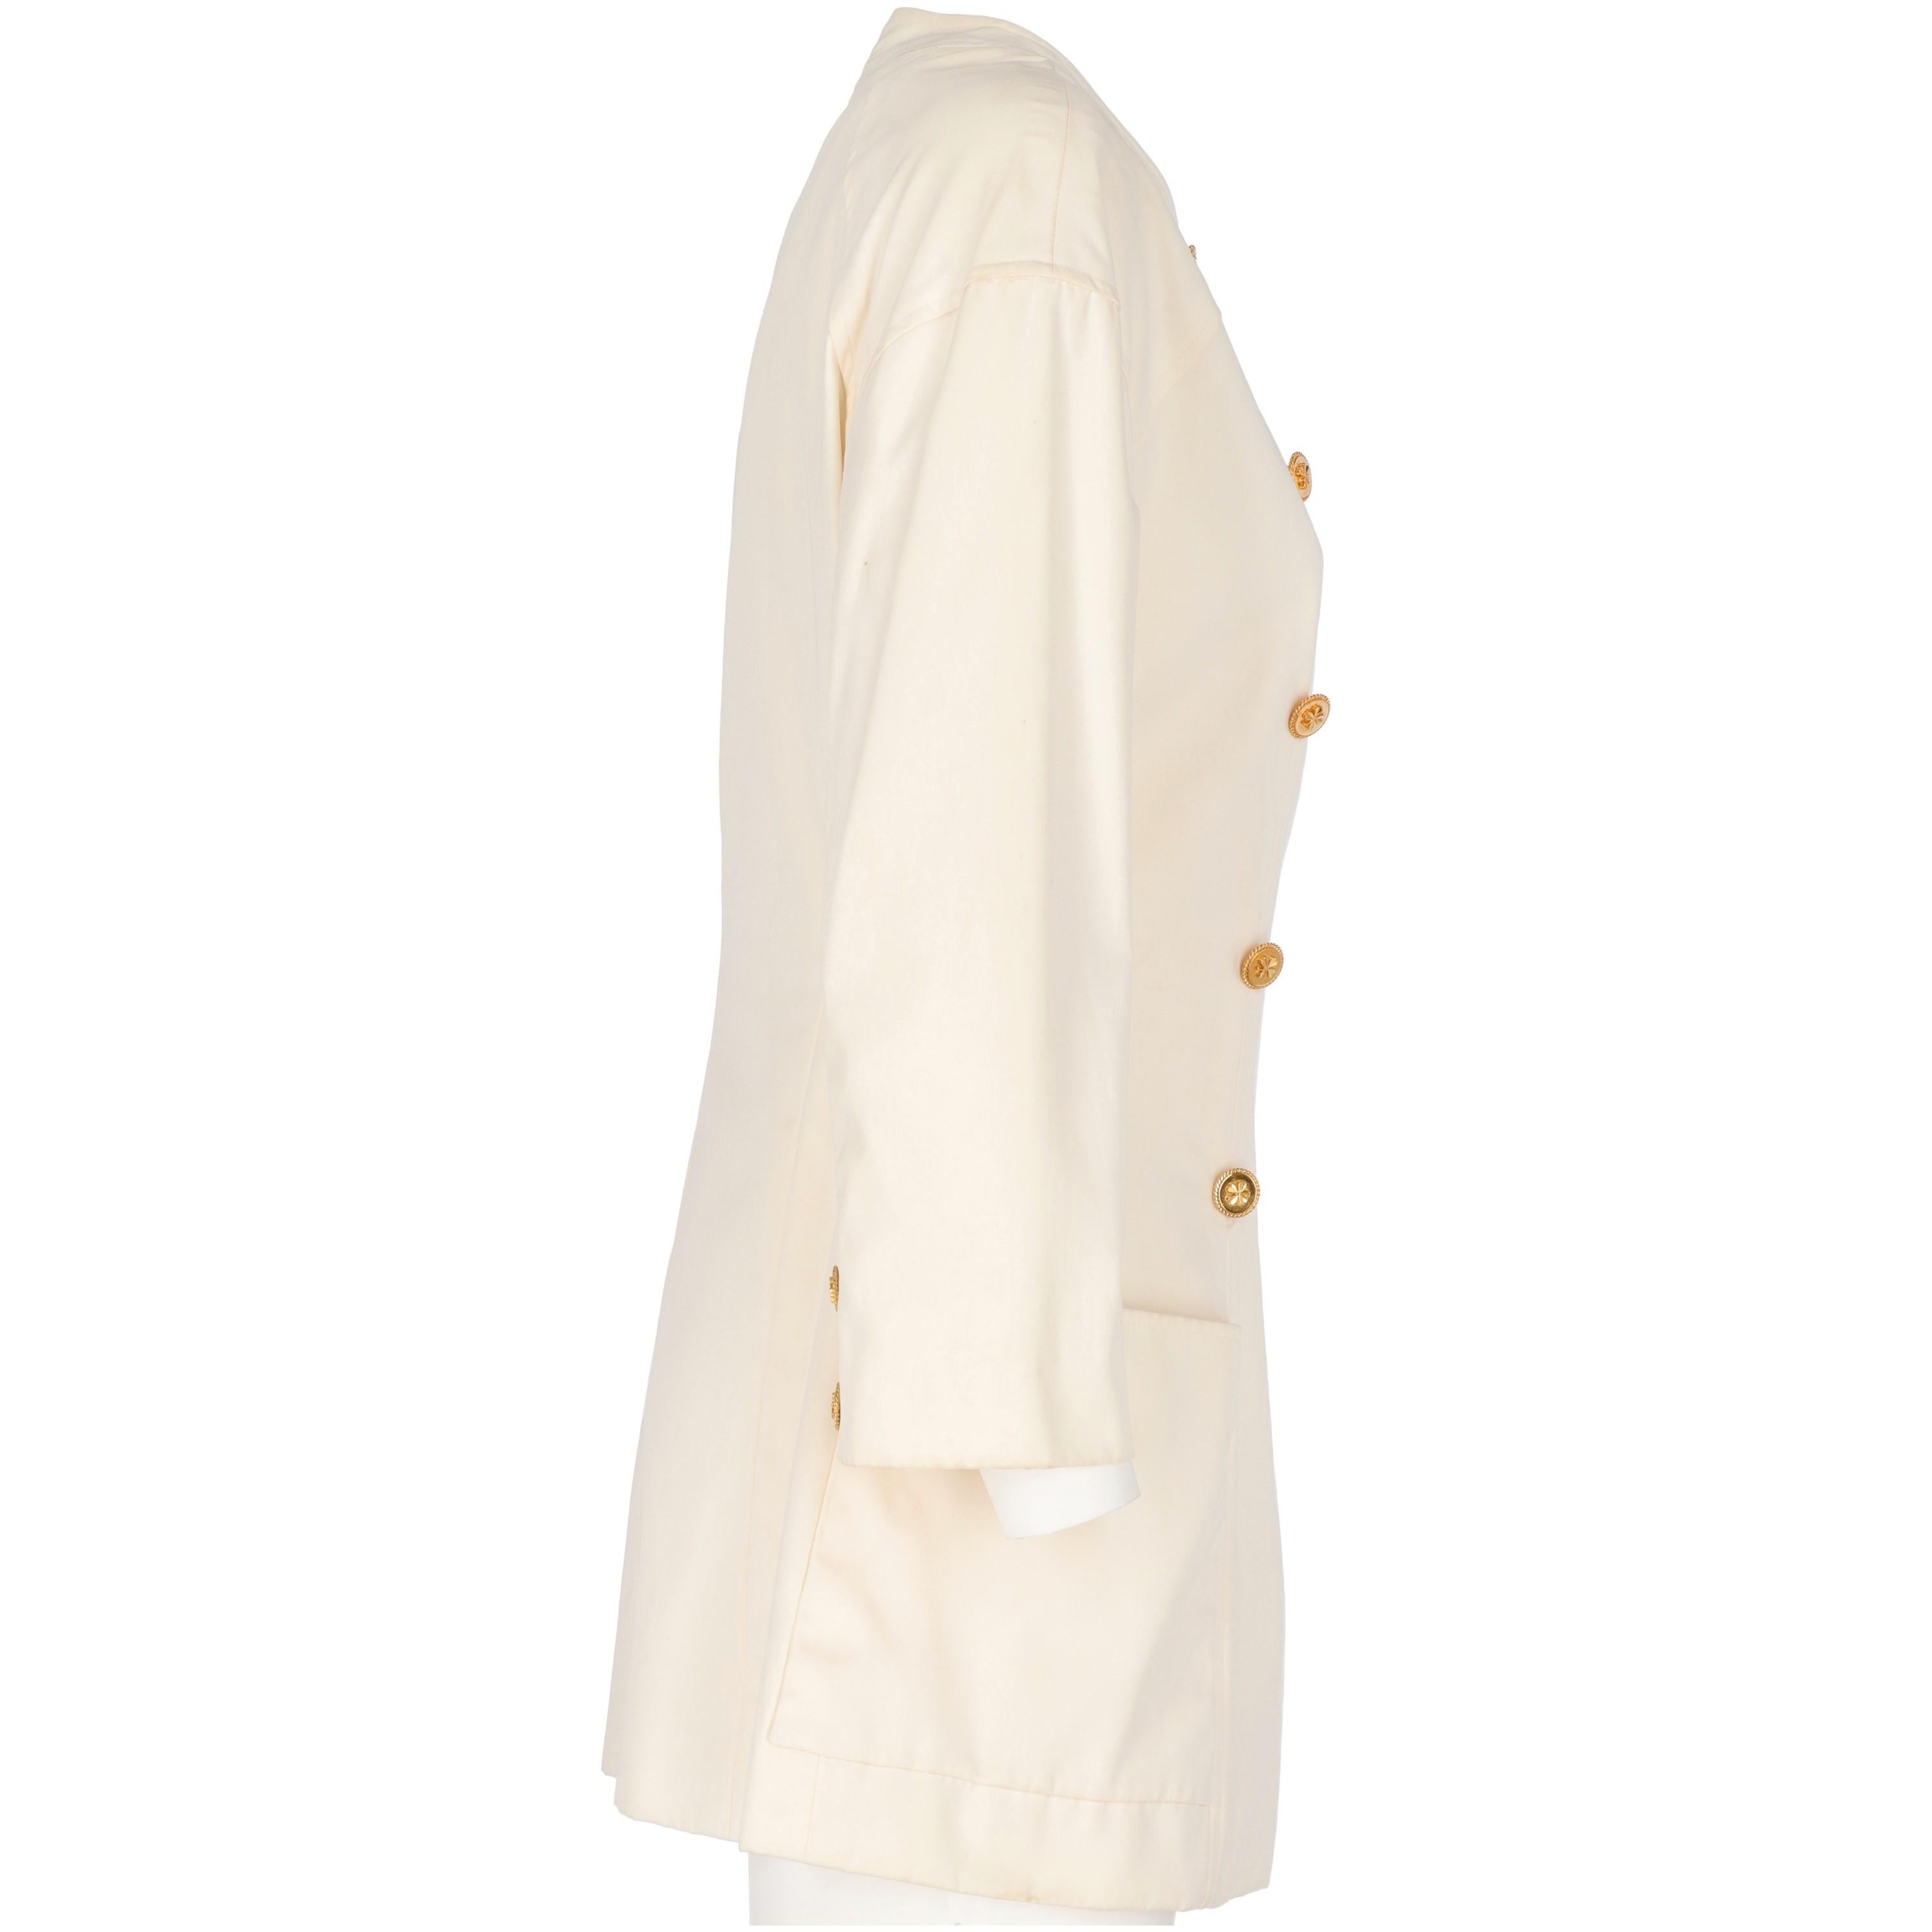 Marvellous Chanel double-breasted jacket in white ivory cotton with a slightly flared cut.
It features a crew neck with two metal tiny press-studs under the collar and two decorative buttons in shiny gold-tone metal with thick details. Midi lenght